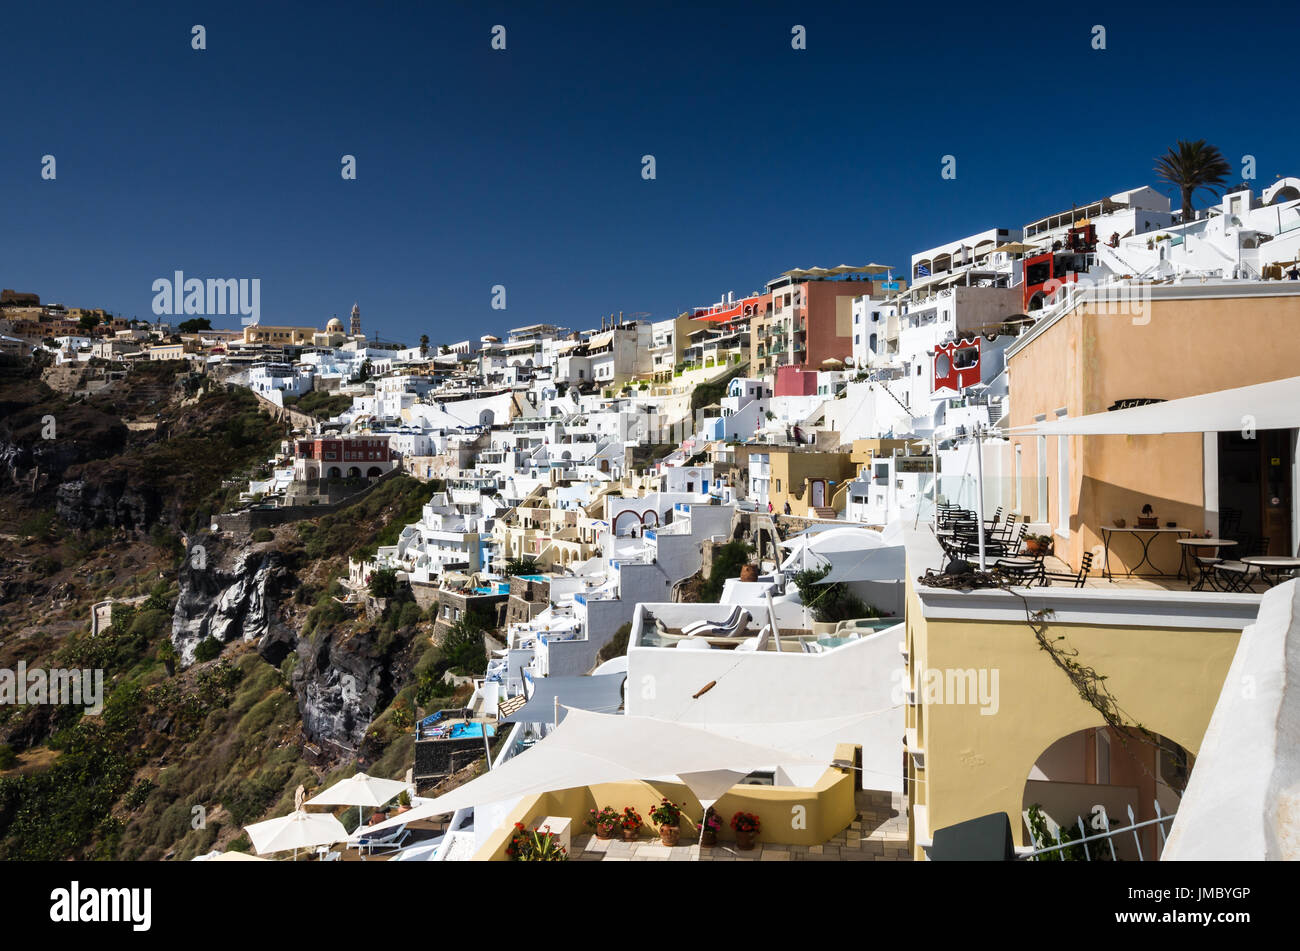 Fira, Thira town, Santorini Cyclade islands, Greece. Beautiful view of the town with white buildings, blue church's roofs and many colored flowers. Stock Photo